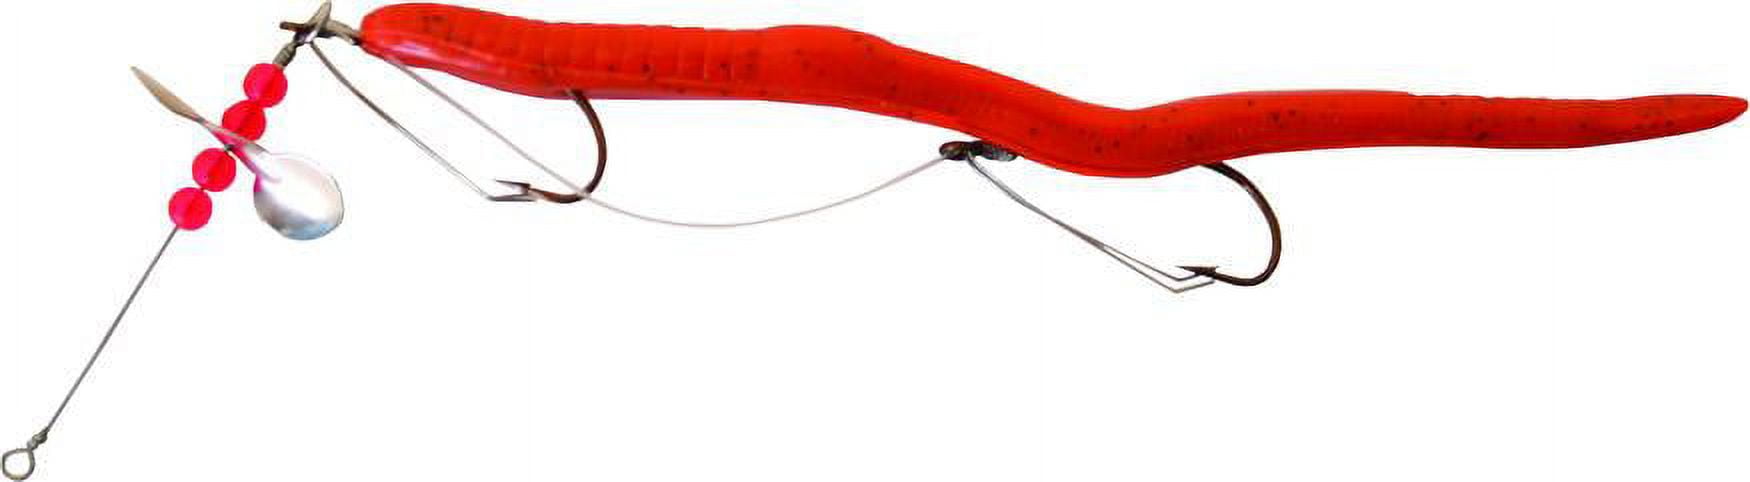  Creme Scoundrel 6-Inch Worm Bait with Wire Leader and  Propeller, WATERMELON : Artificial Fishing Bait : Sports & Outdoors